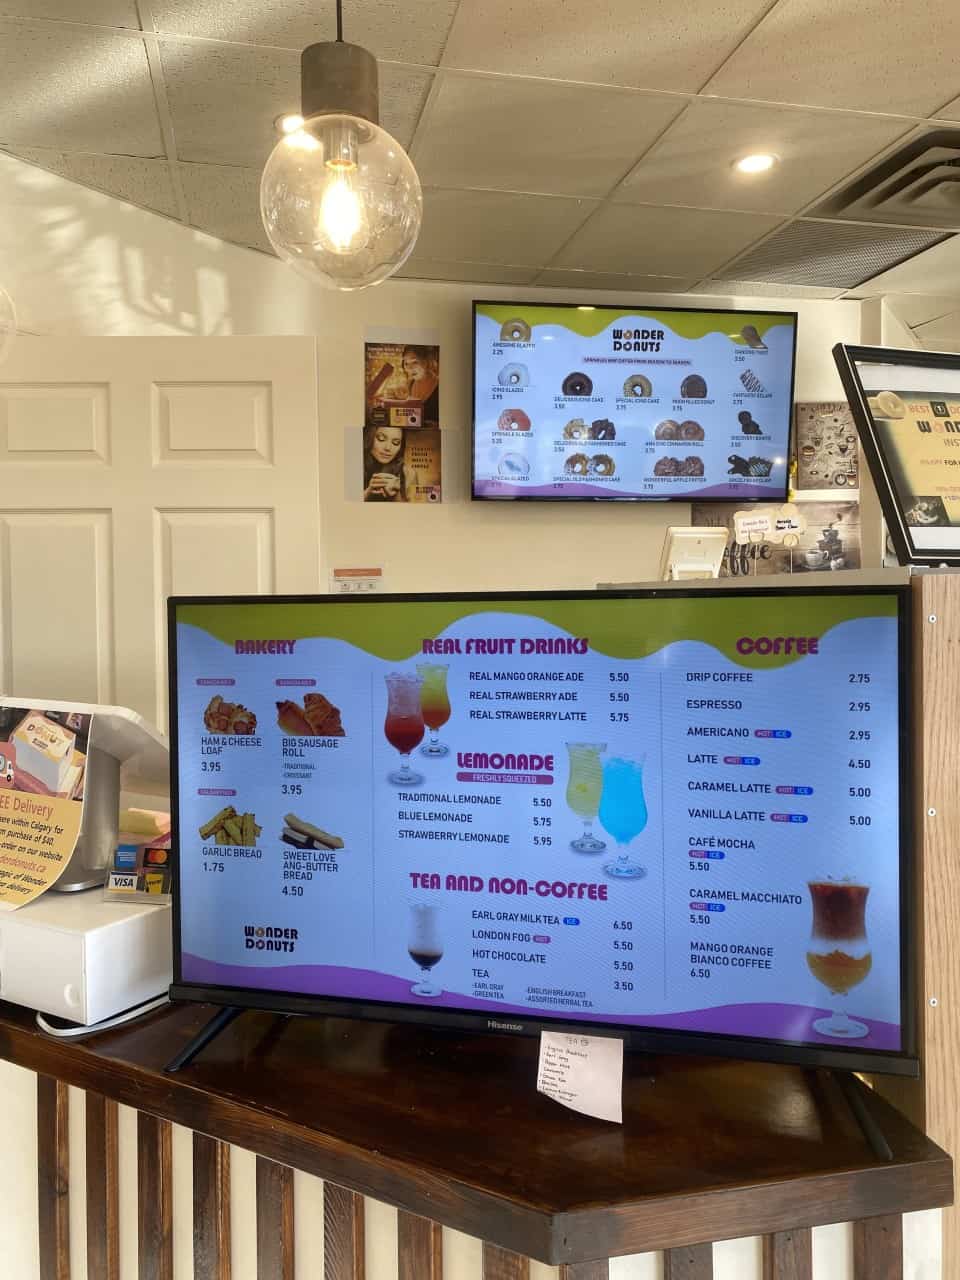 Wonder Donuts Menu Calgary Alberta Canada - You will find a diverse menu with a variety of donut and drink options. 